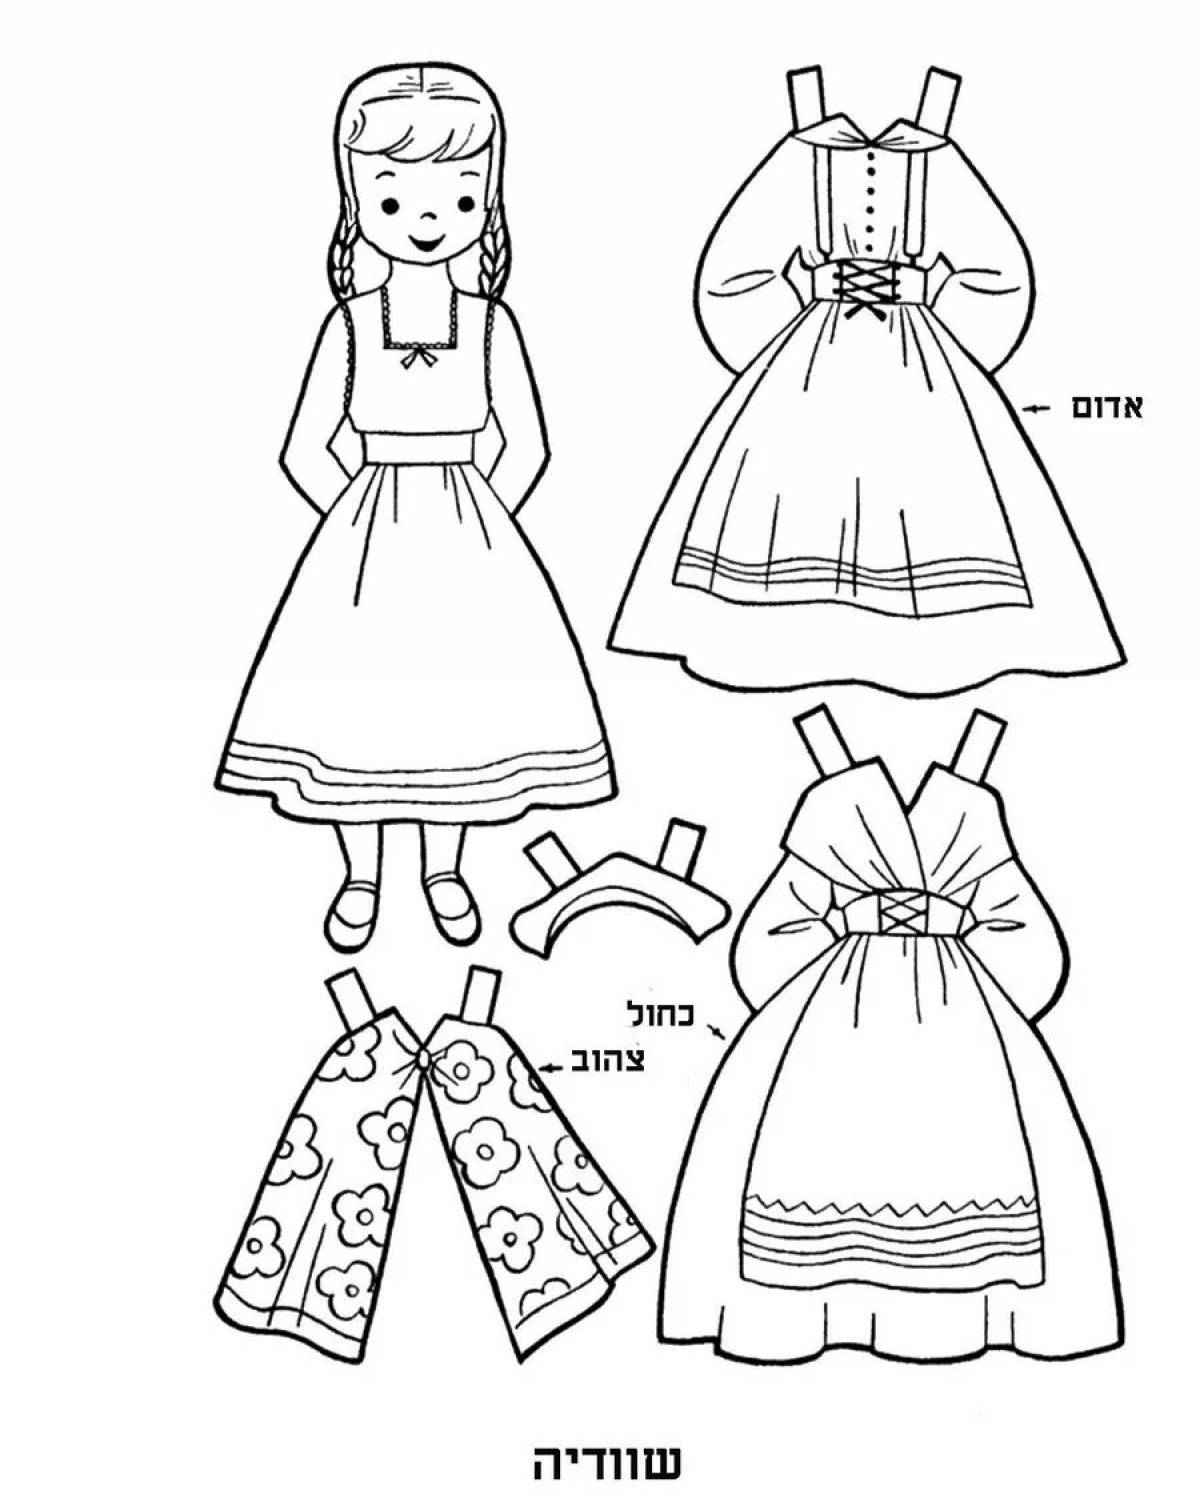 Coloring page festive belarusian doll